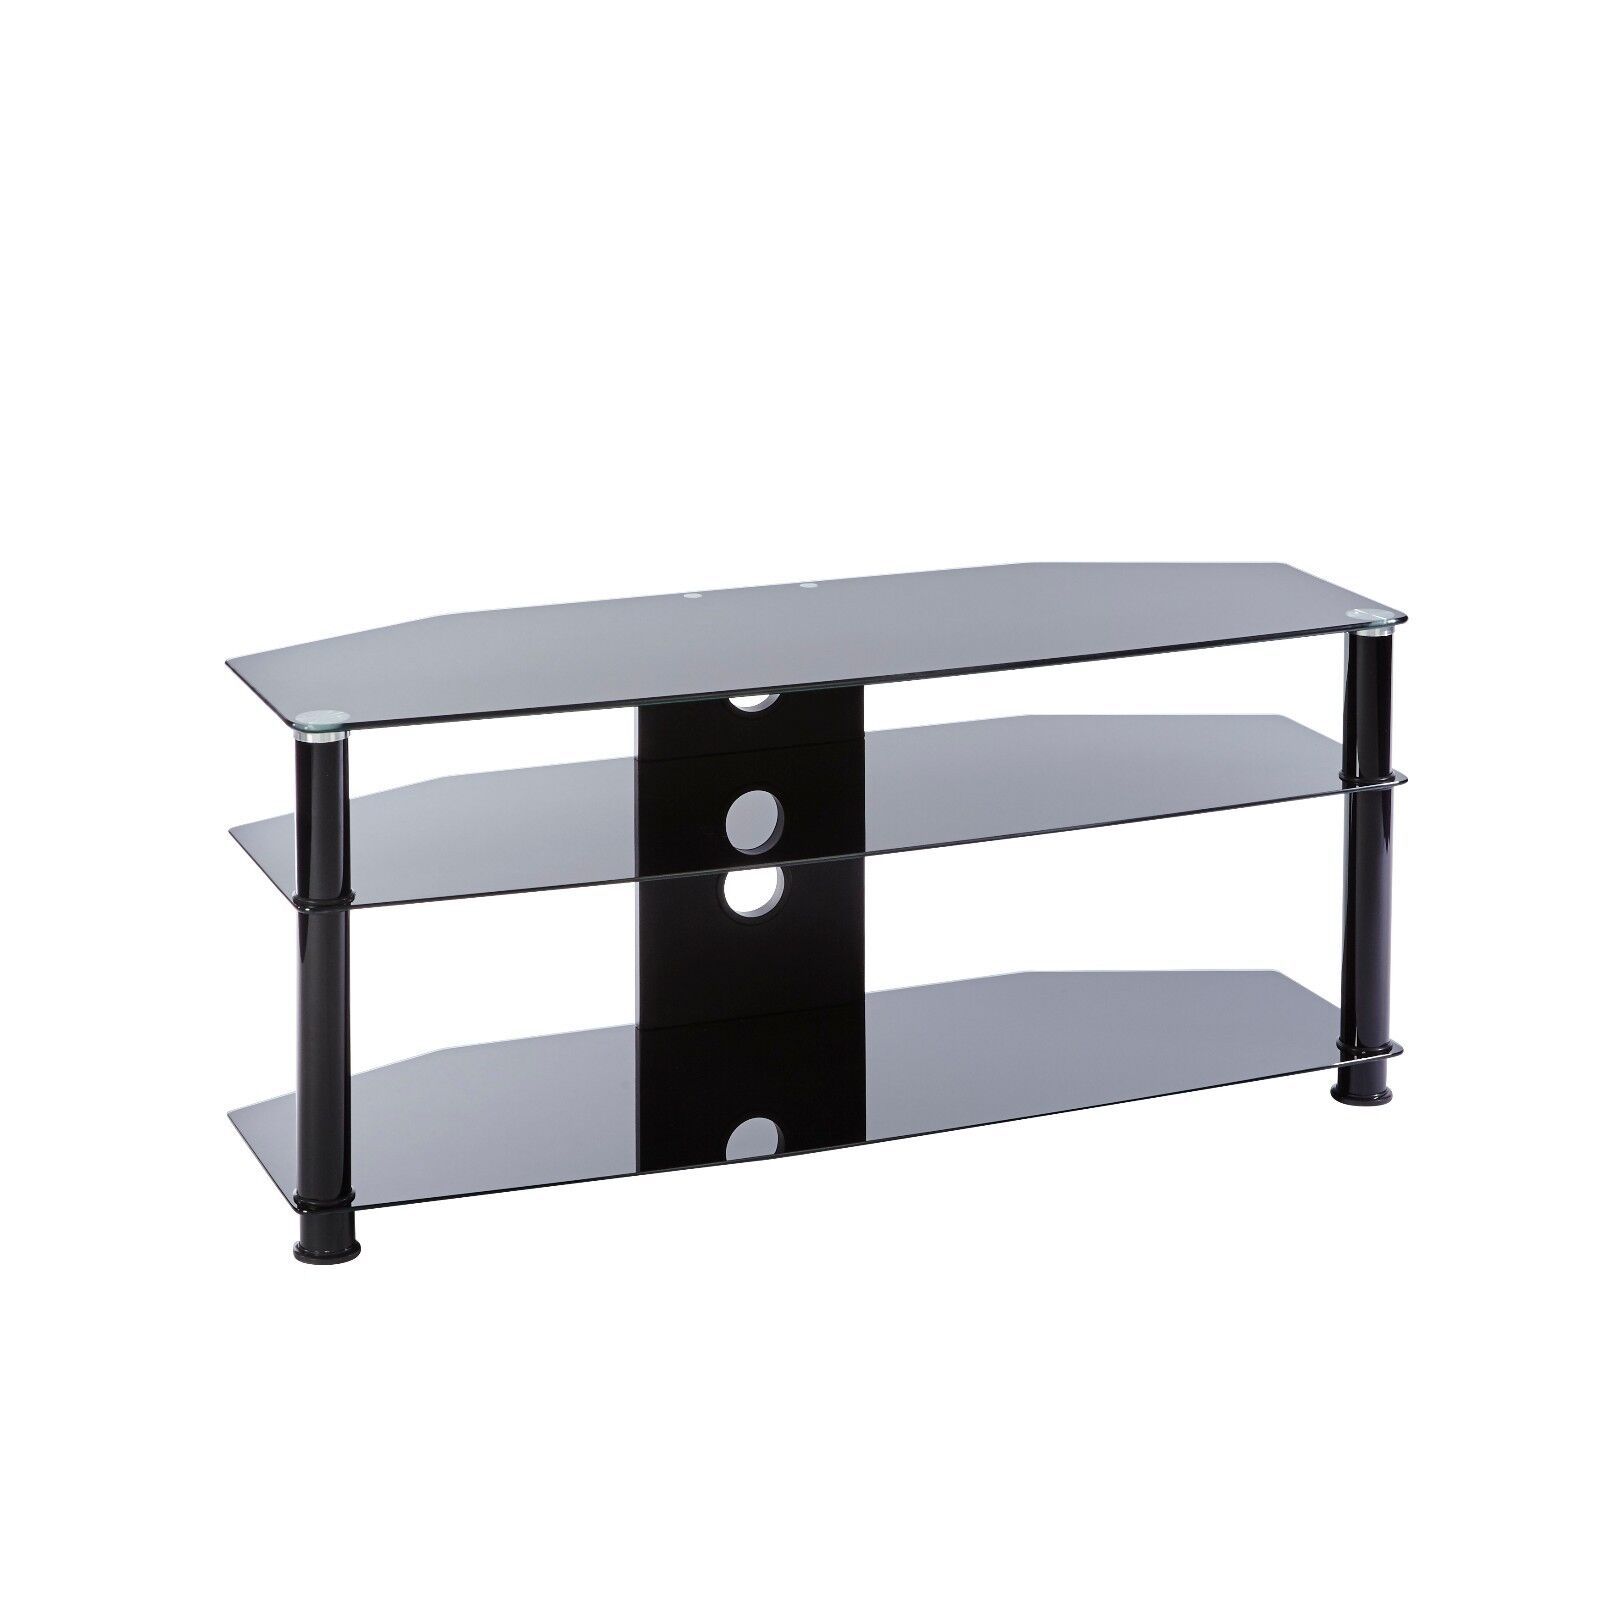 Black Glass Tv Stand 3 Tier Shelf Unit 115cm Fits 42 50 55 Inch Led Lcd Regarding Tier Stands For Tvs (View 19 of 20)